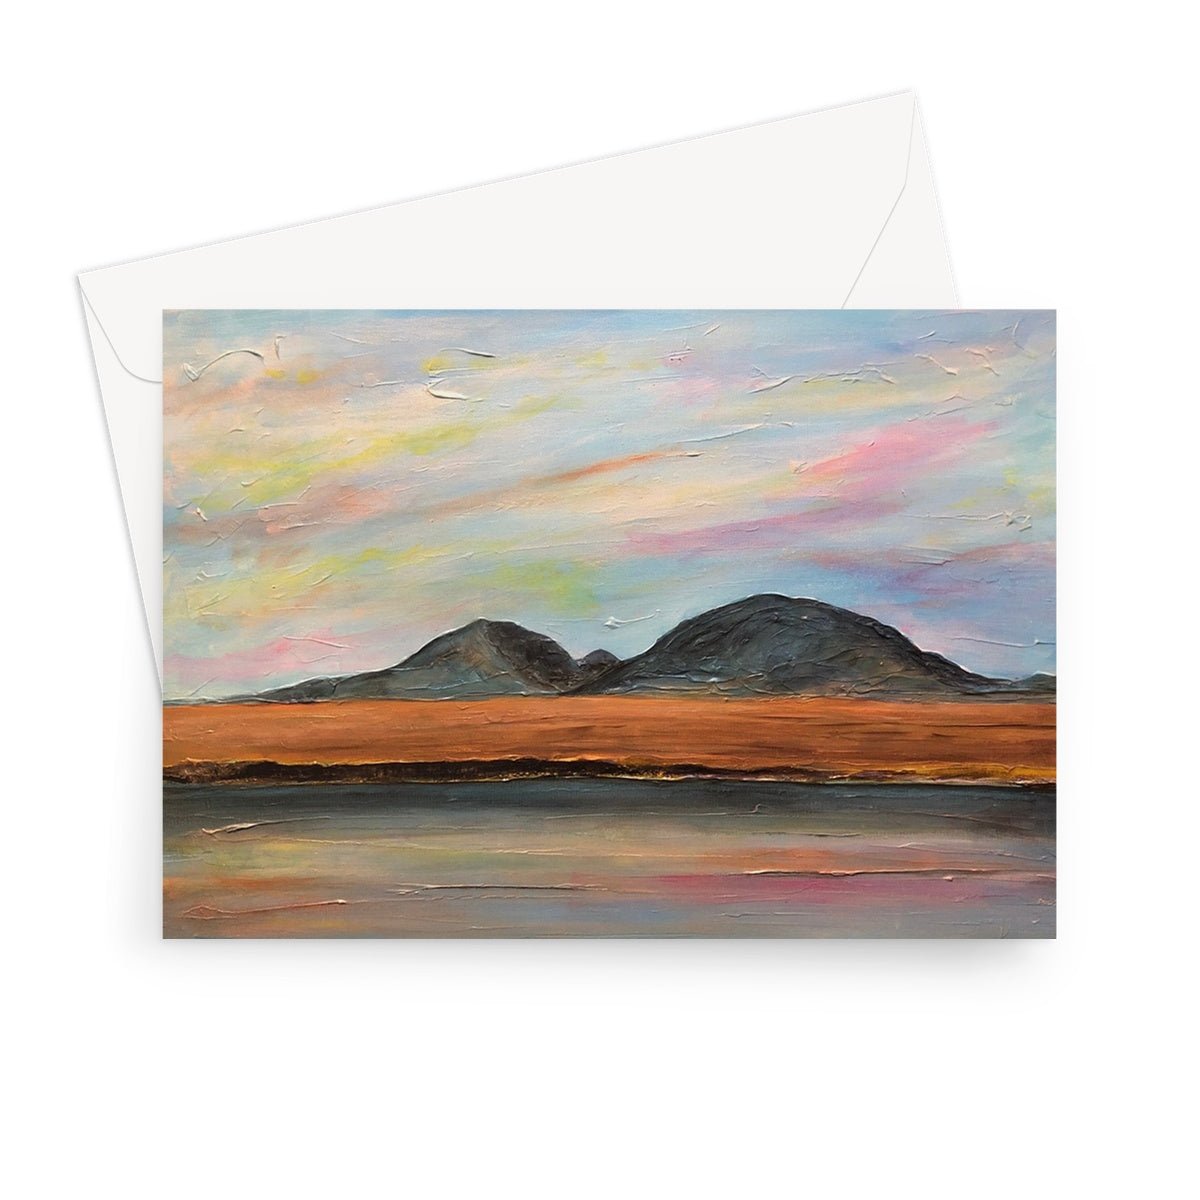 Jura Dawn Art Gifts Greeting Card-Greetings Cards-Hebridean Islands Art Gallery-7"x5"-10 Cards-Paintings, Prints, Homeware, Art Gifts From Scotland By Scottish Artist Kevin Hunter